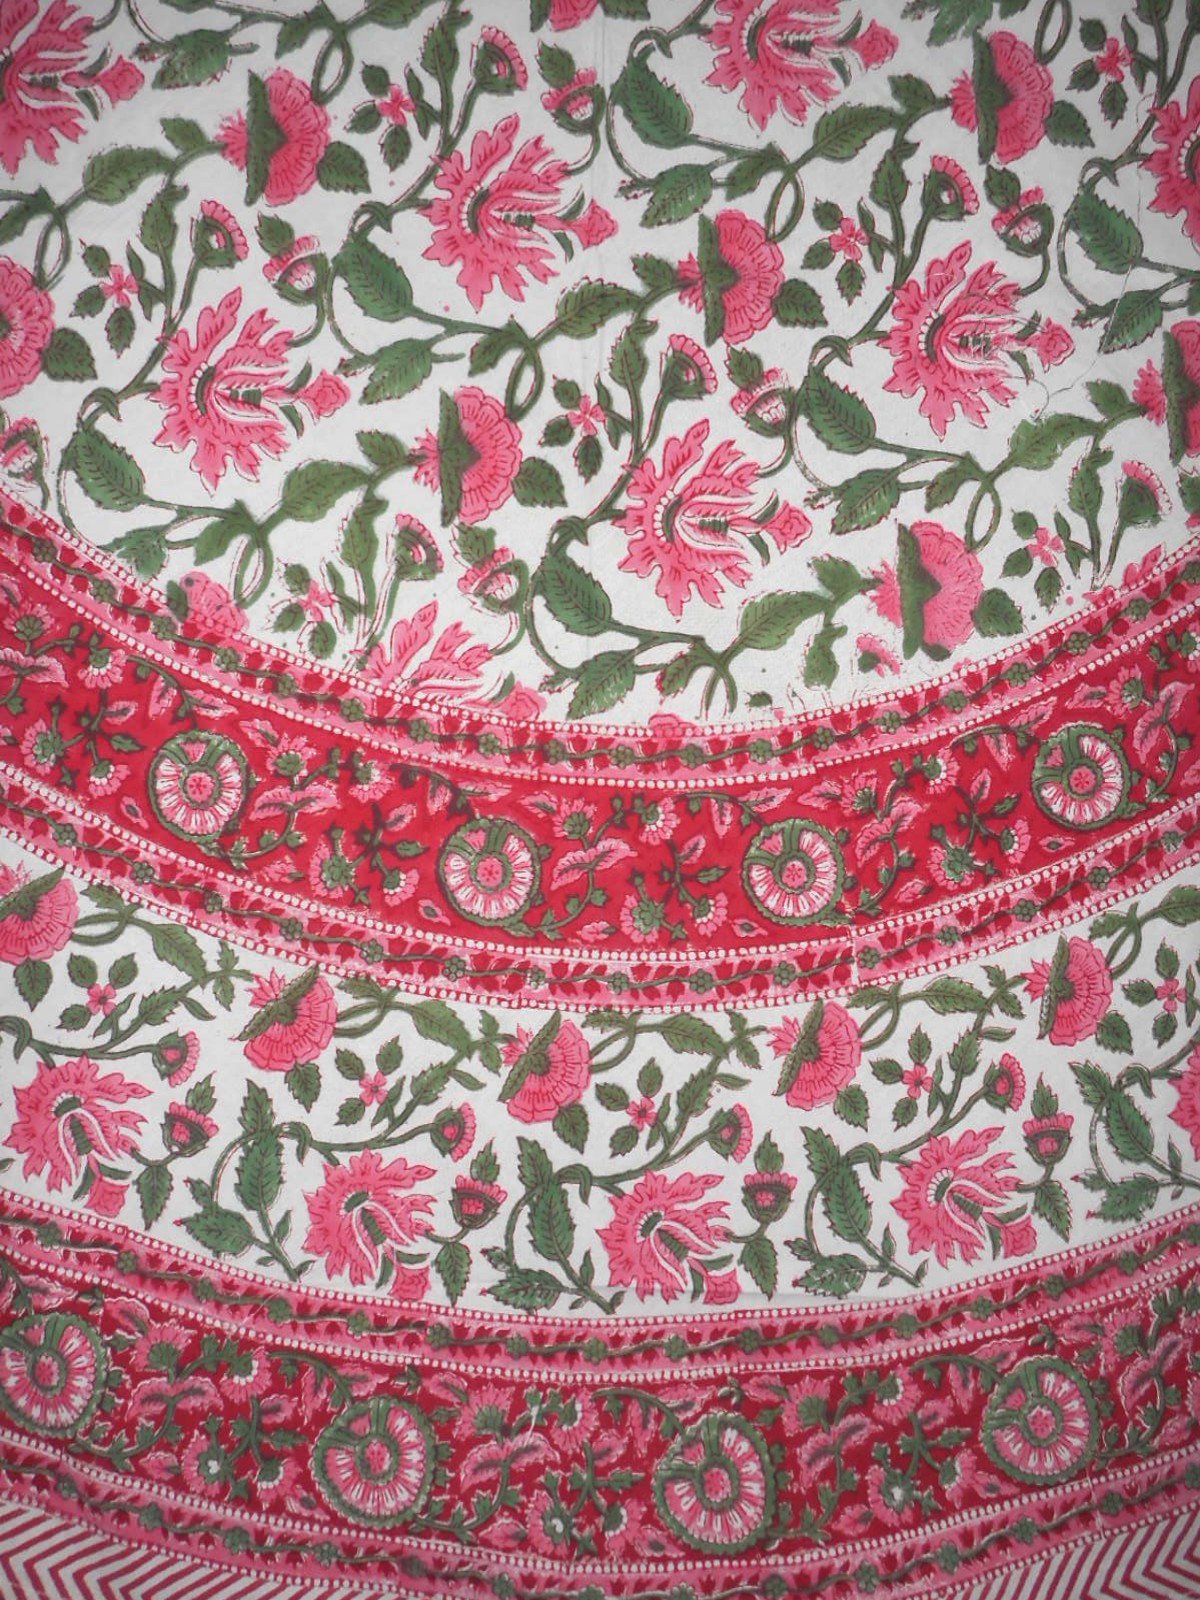 Homestead Pretty in Pink Block Print Round Cotton Tablecloth 68" Pink